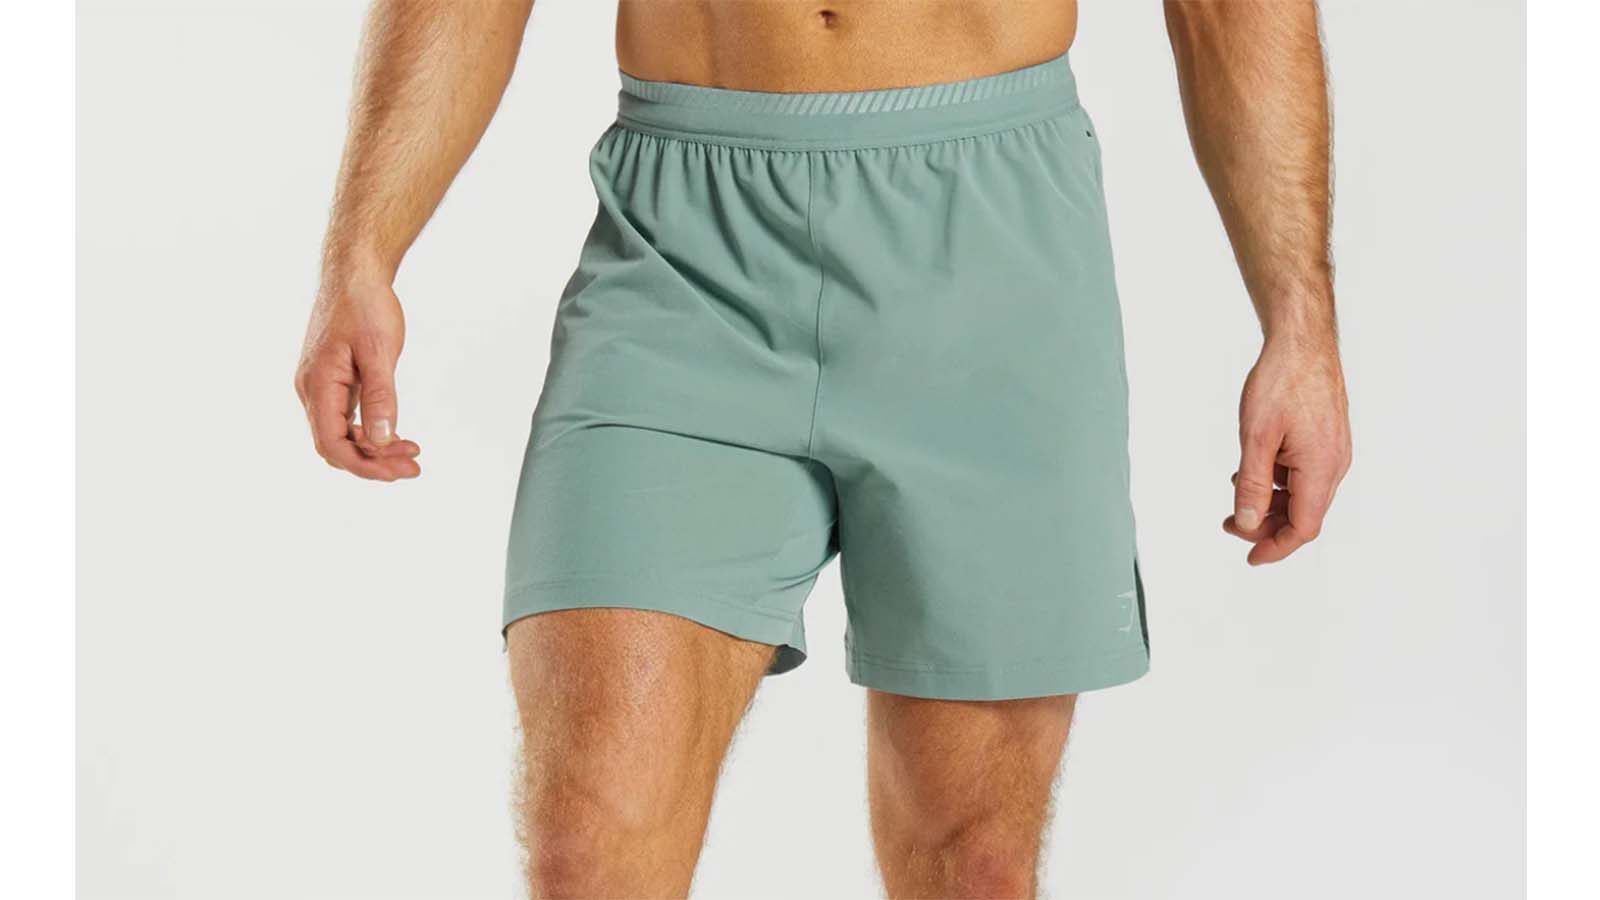 Gymshark Womens S Teal Green Apex Seamless Workout Gym Shorts Compression